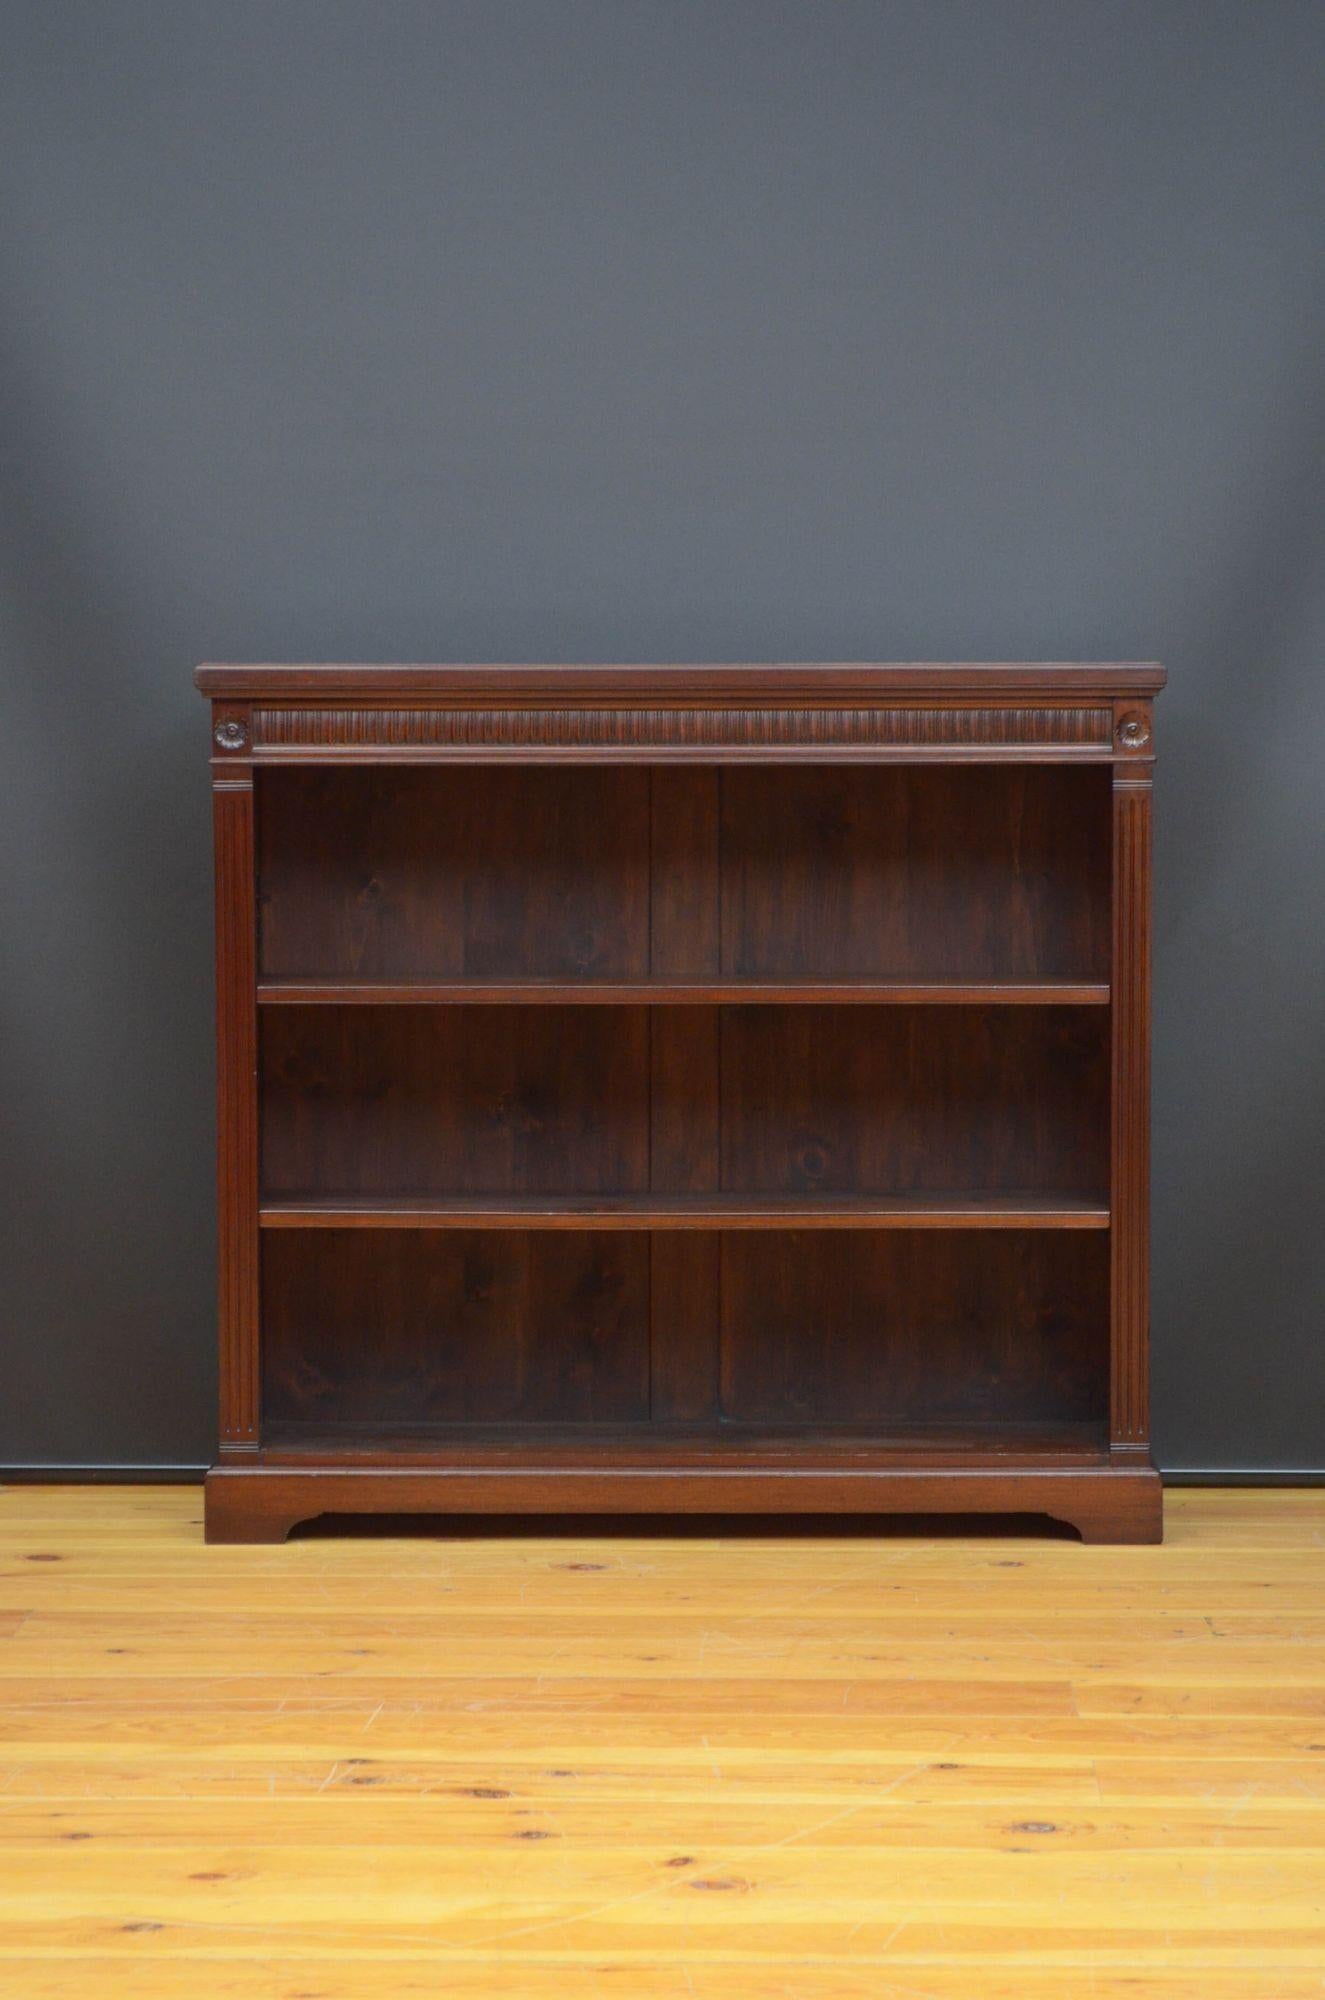 J012 Late Victorian mahogany bookcase, having figured top above concave reseeded frieze and two height adjustable shelves, all flanked by reeded pilasters and standing on shaped plinth base. This antique bookcase is in home ready condition.